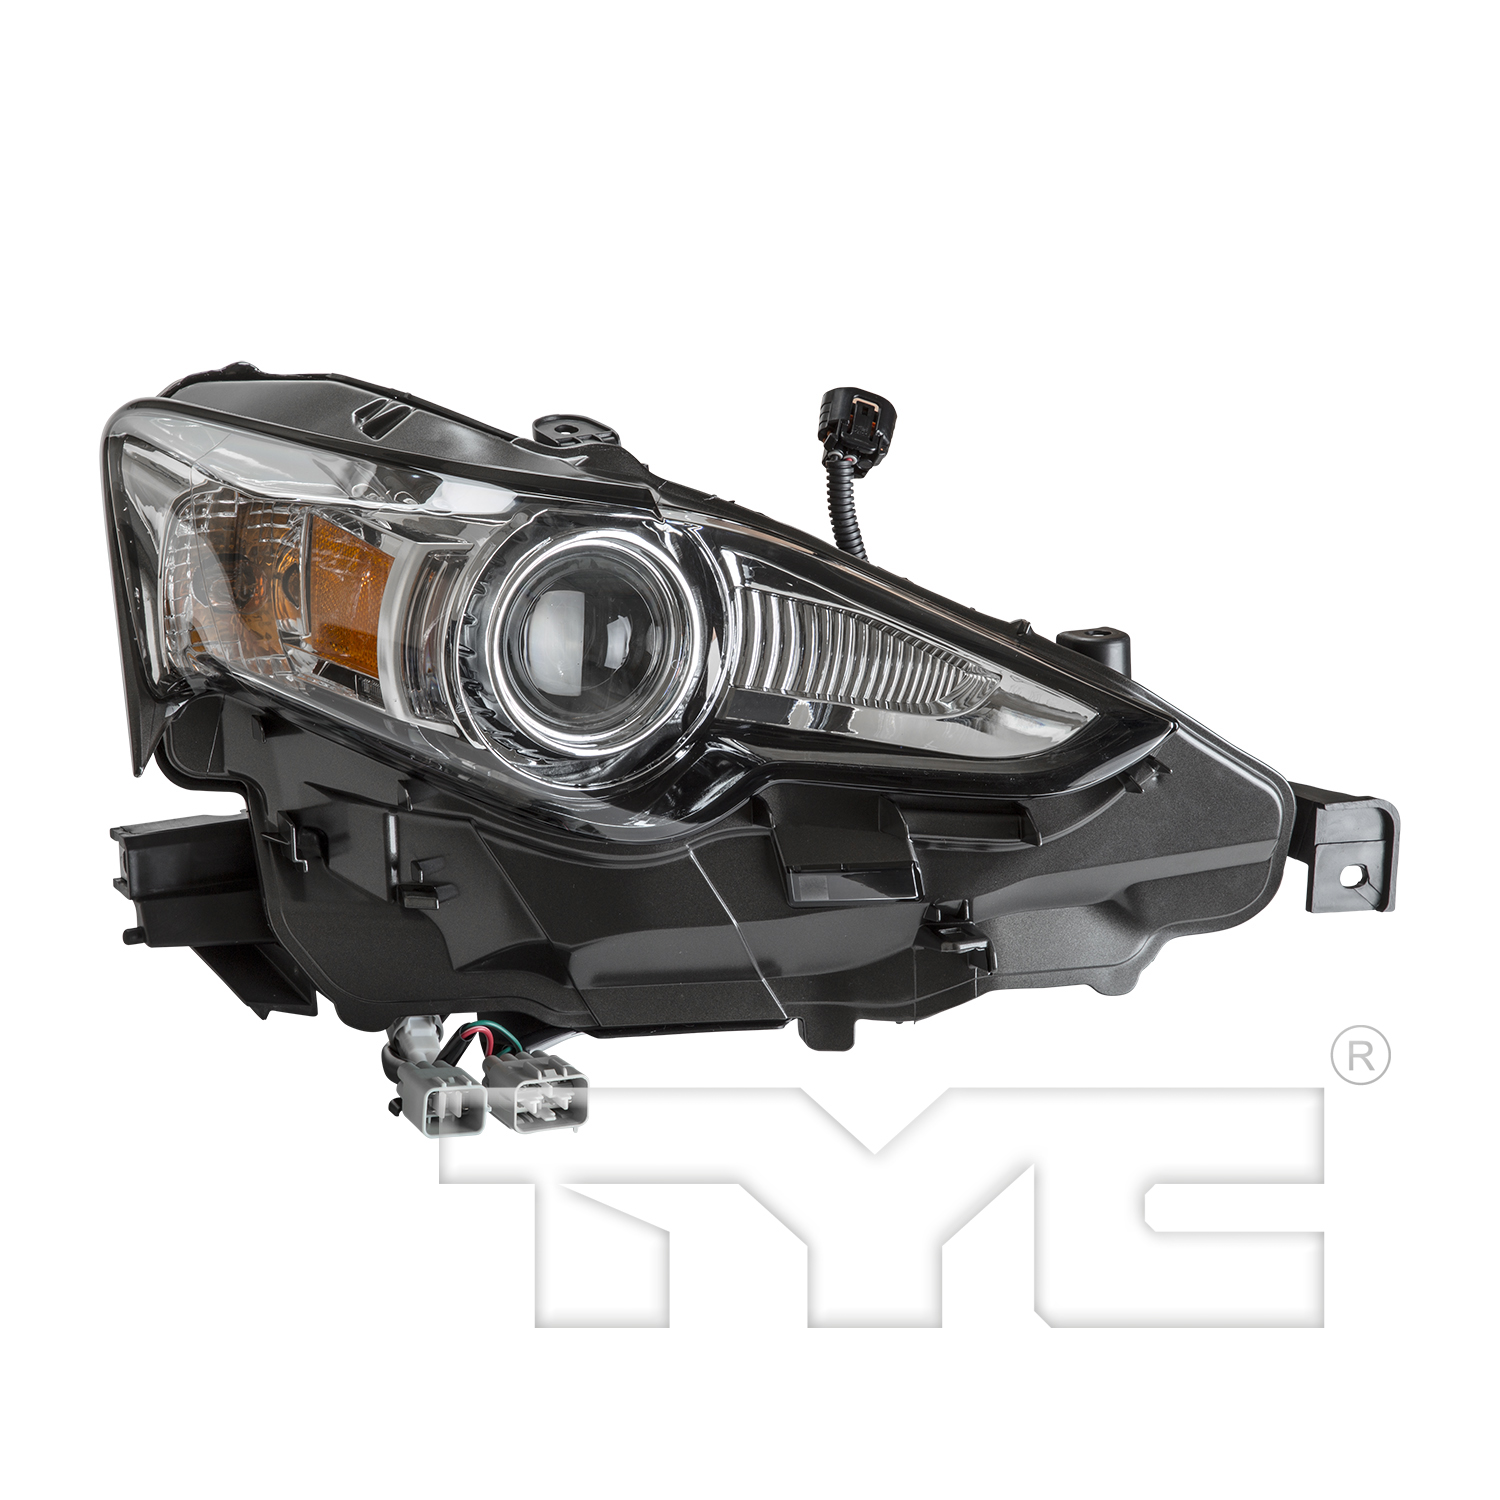 Aftermarket HEADLIGHTS for LEXUS - IS200T, IS200t,16-16,RT Headlamp assy composite